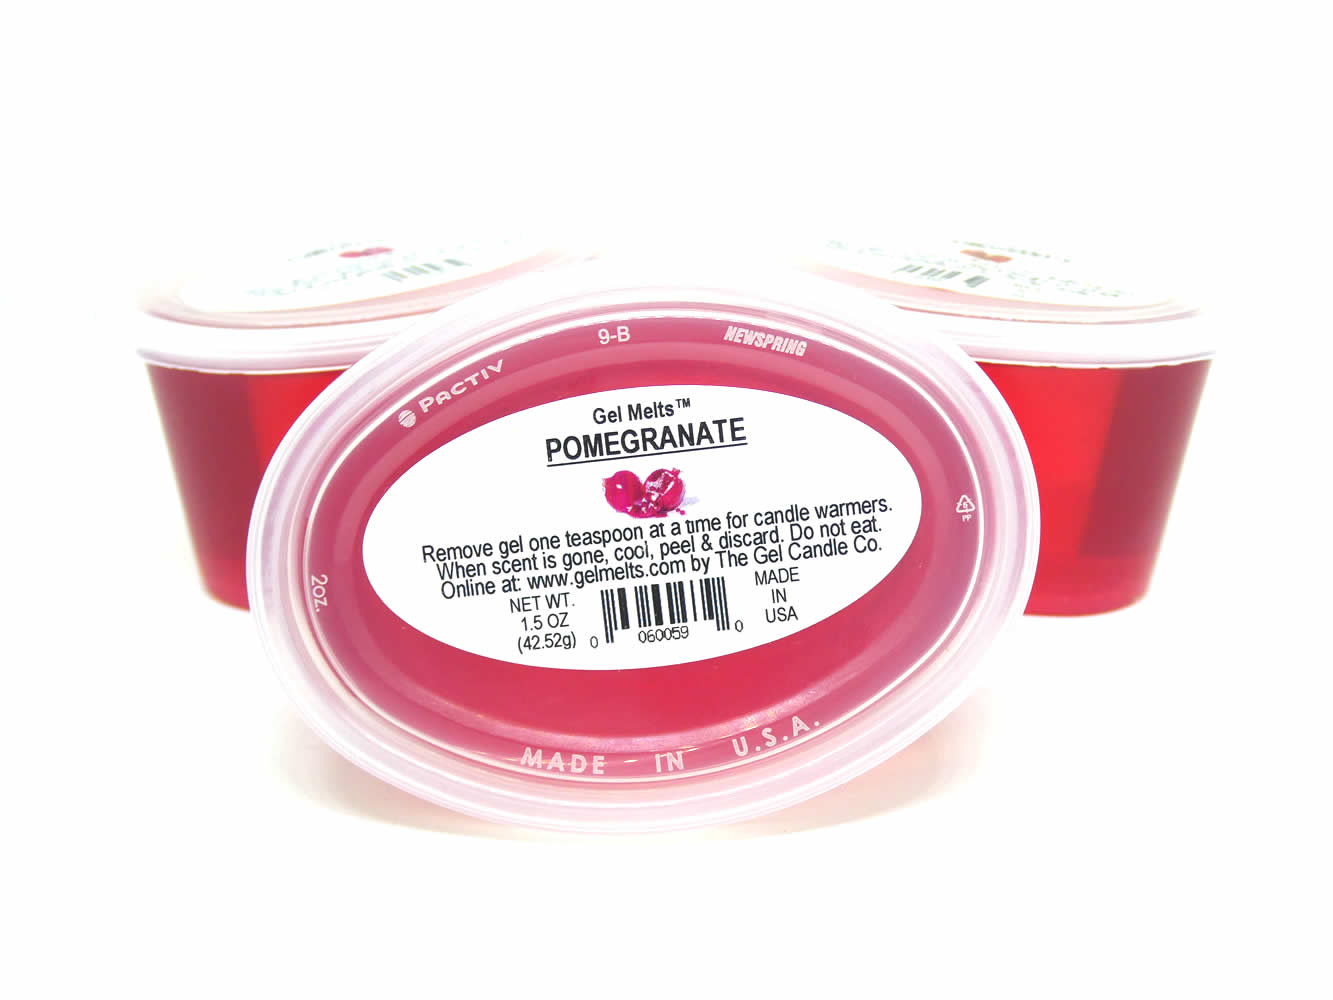 Pomegranate scented Gel Melts™ Gel Wax for warmers - 3 pack - Click Image to Close